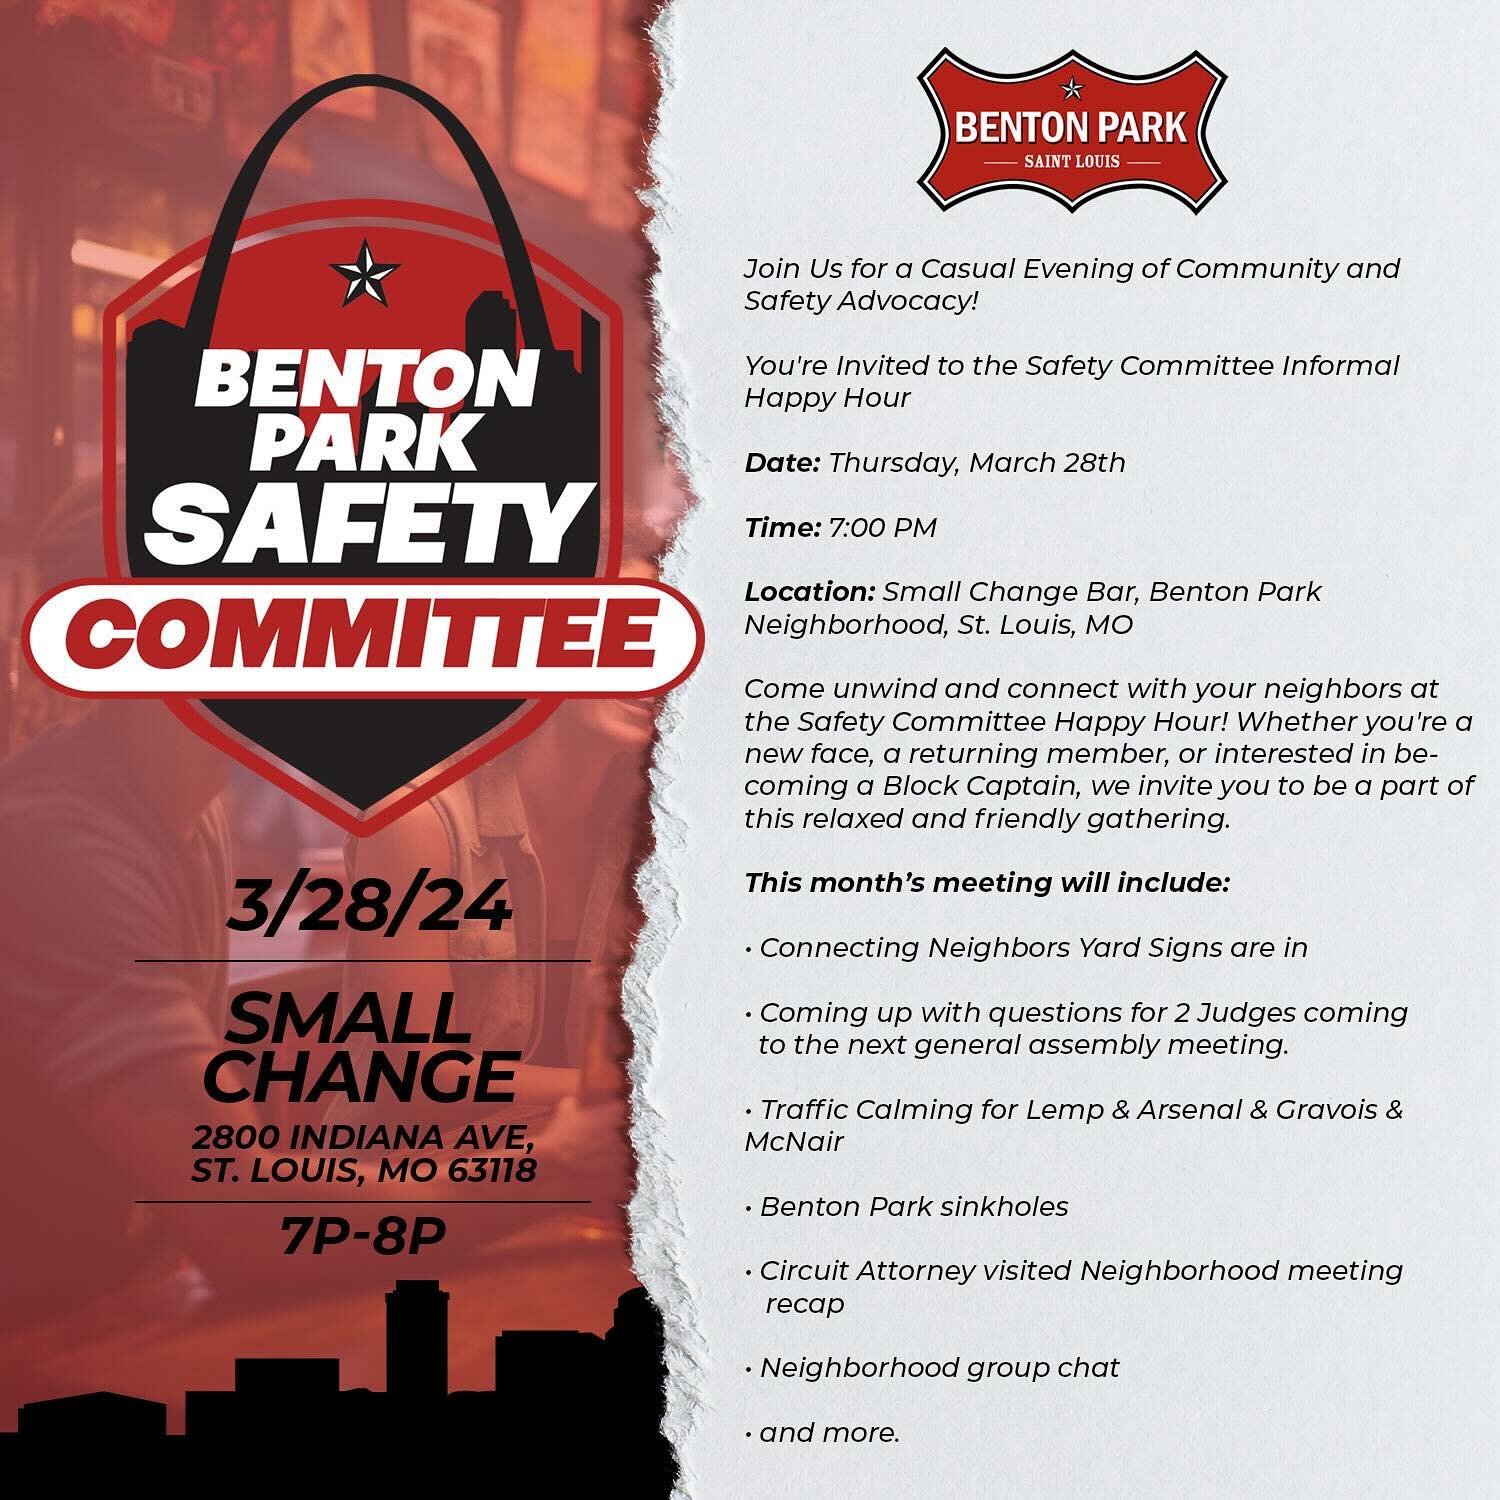 📢 Calling all community advocates in St. Louis, MO! 🌟 Join us for a Casual Evening of Community and Safety Advocacy at the Safety Committee Informal Happy Hour!

📅 Date: Thursday, March 28th 🕖 Time: 7:00 PM 📍 Location: Small Change Bar, Benton P